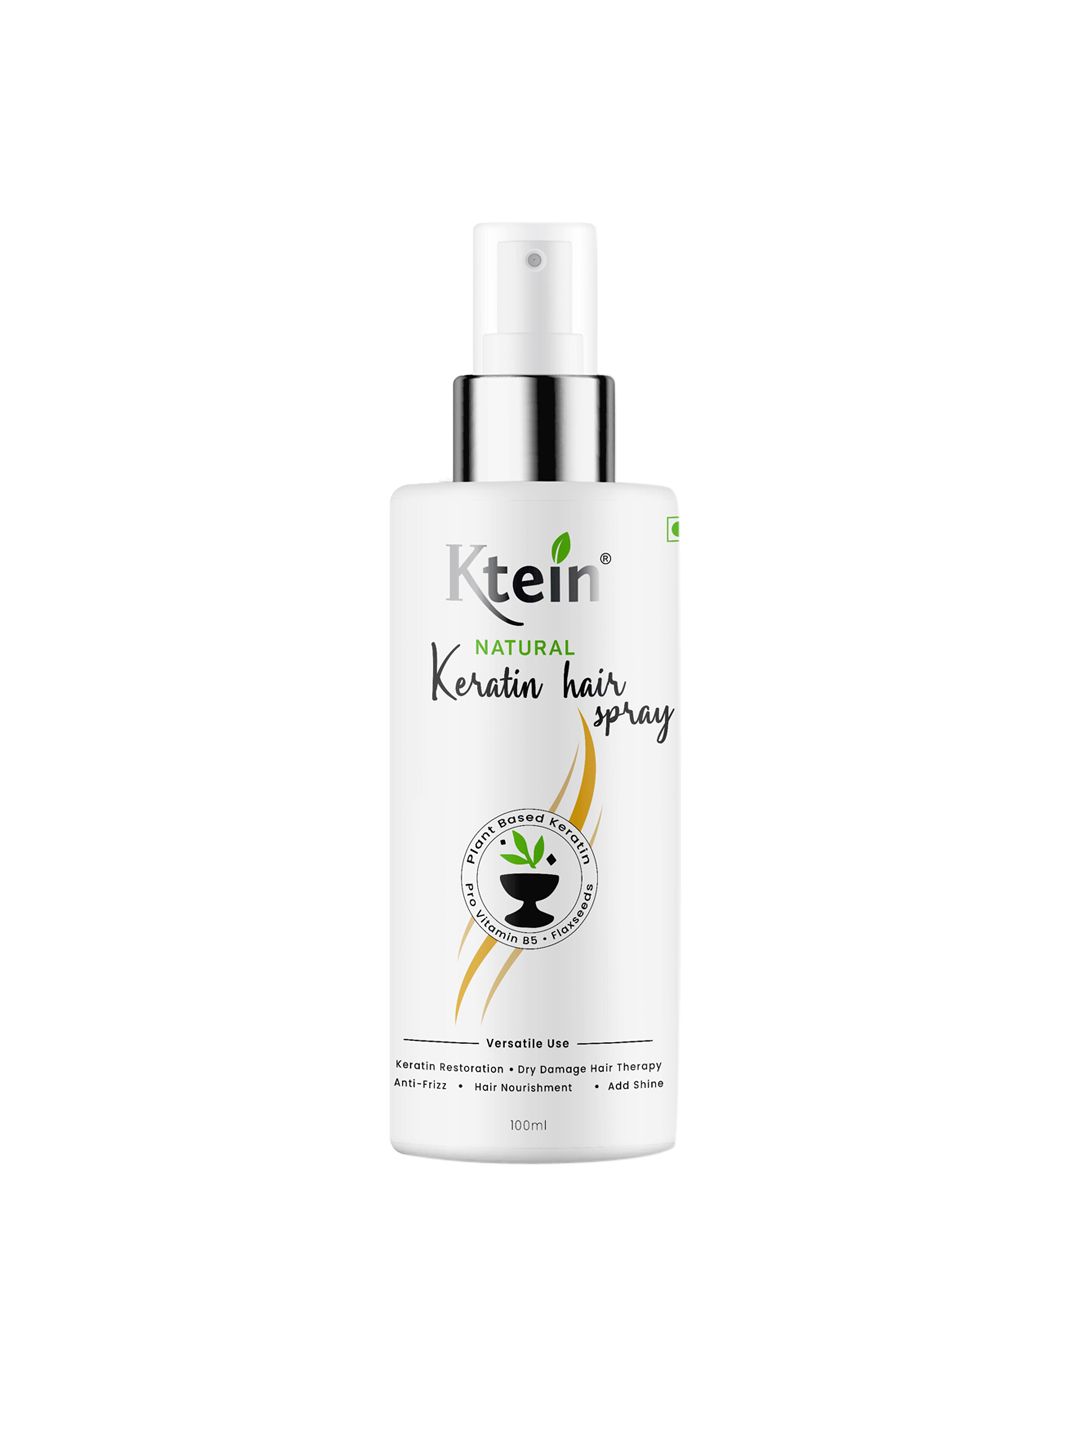 Ktein Natural Keratin Hair Spray with Soy & Vitamin E 100 ml Price in India